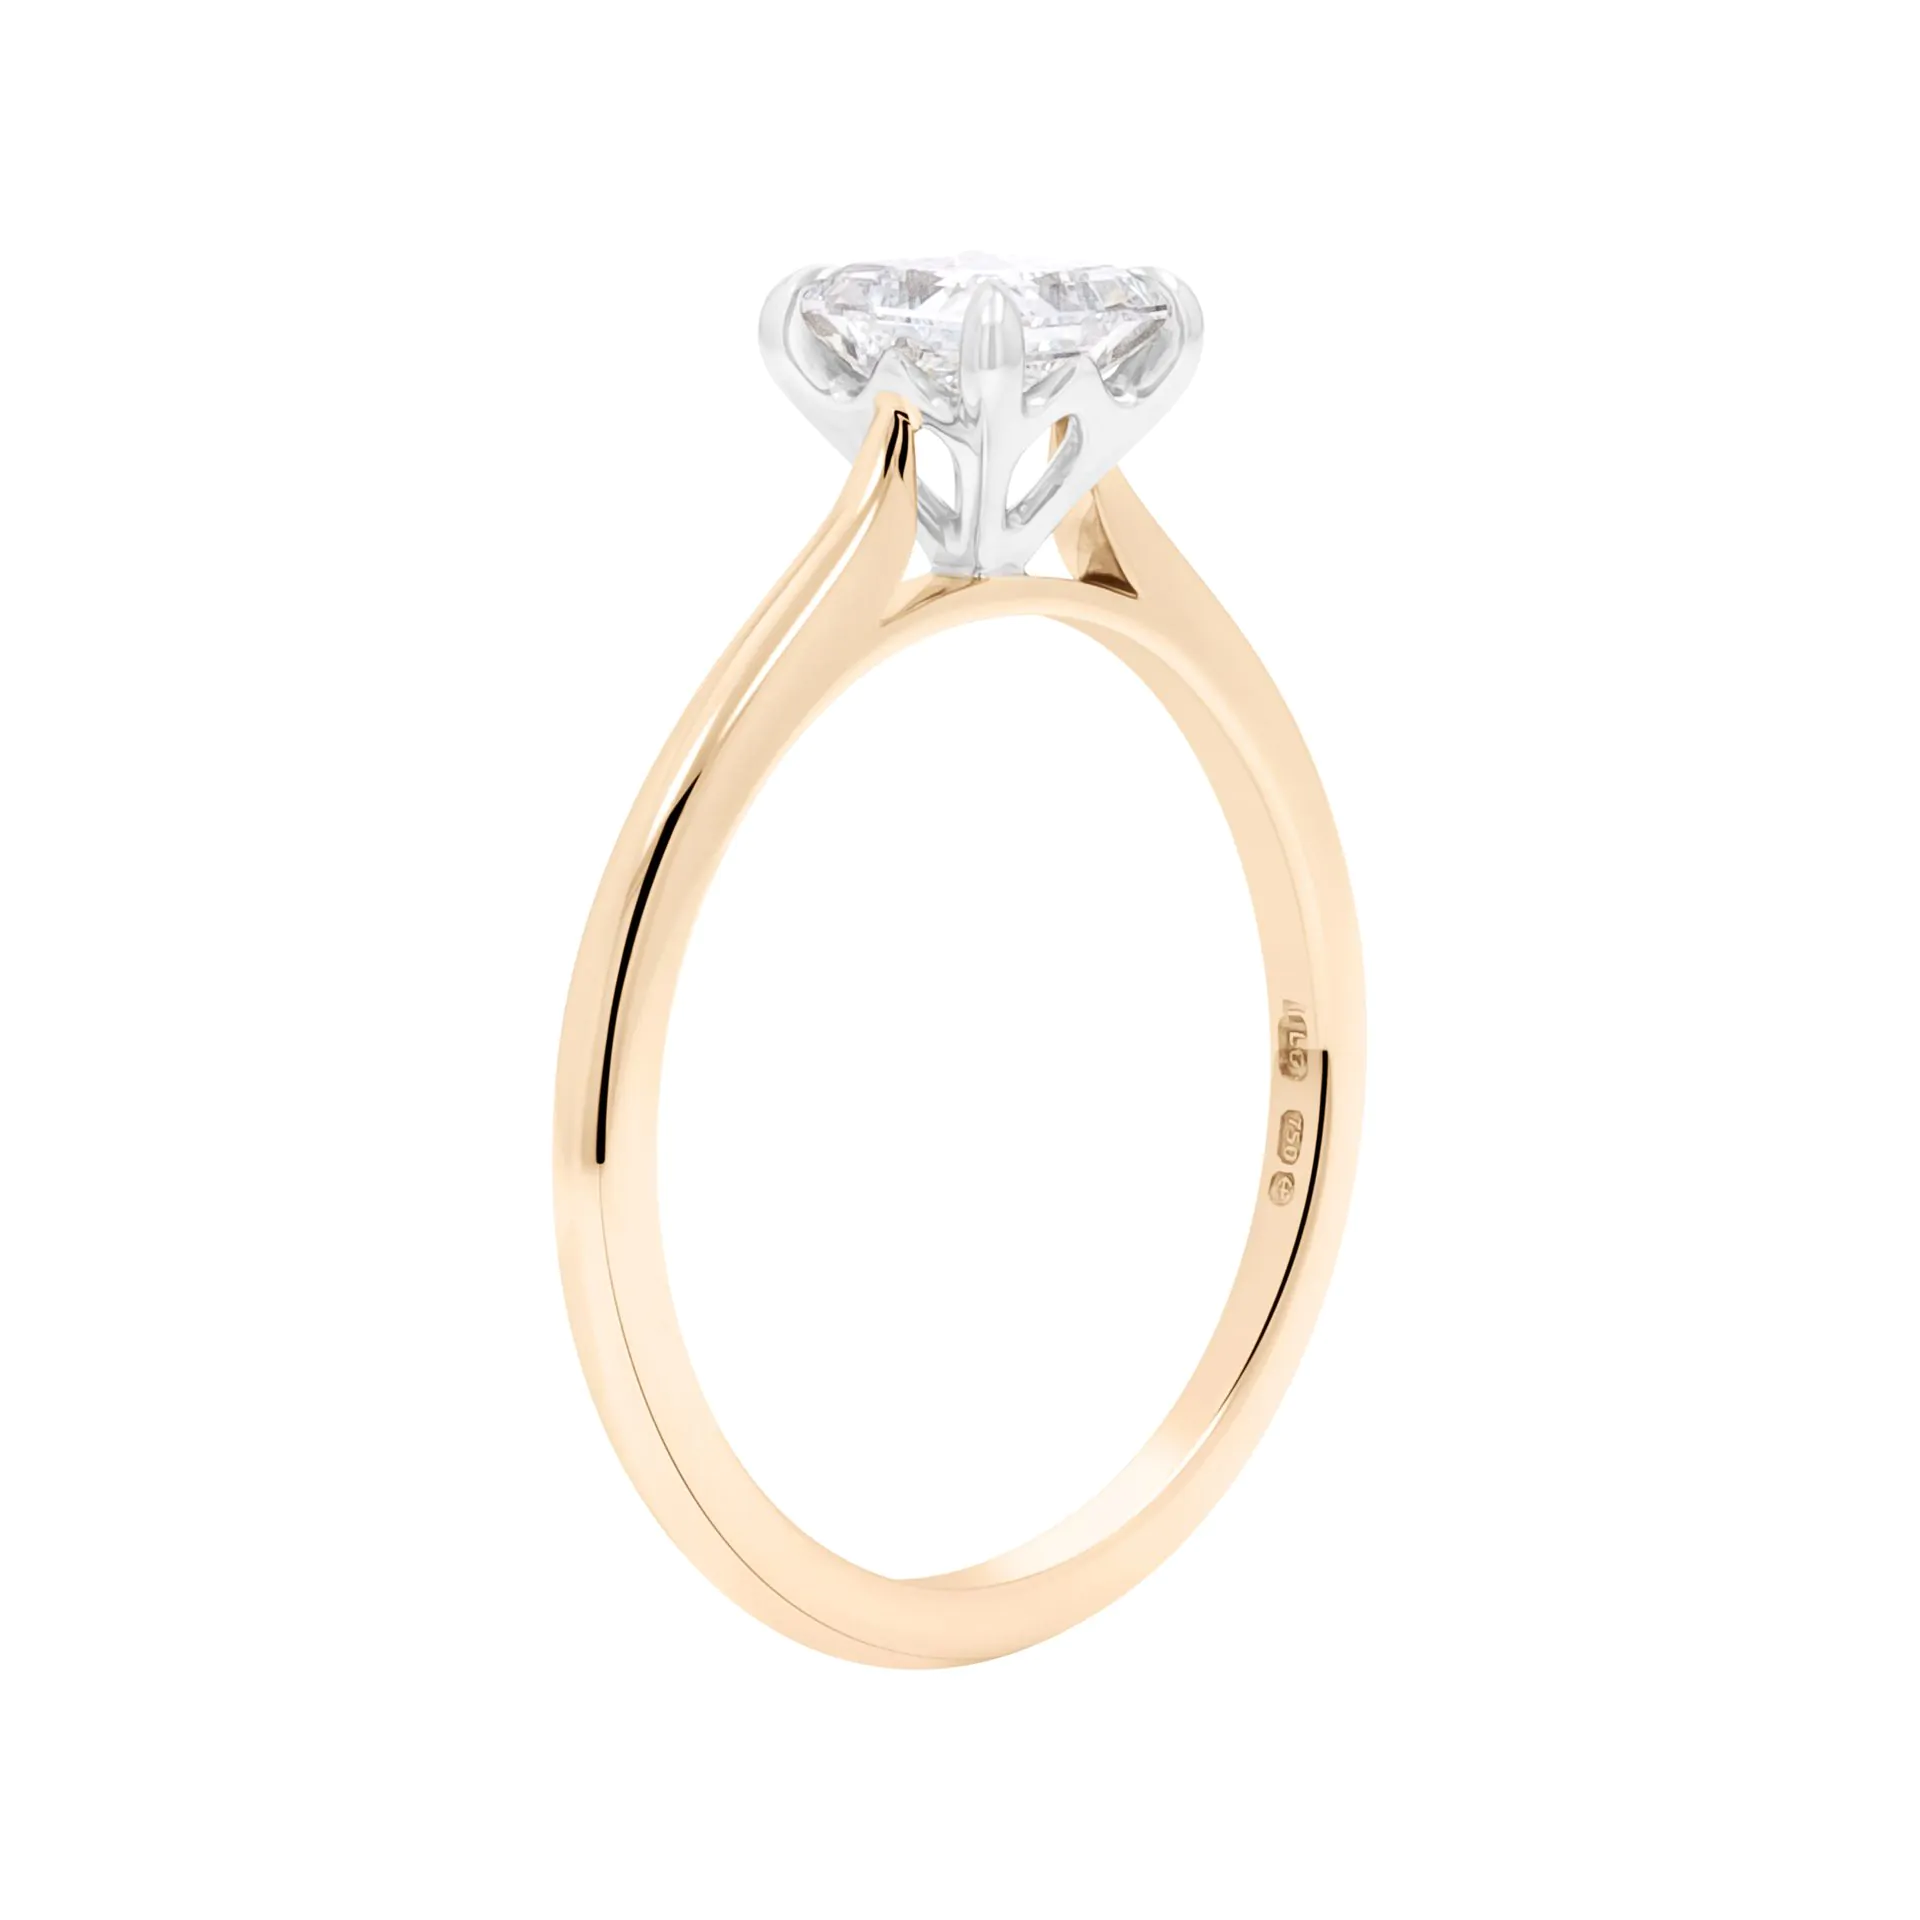 Wendy 18ct Yellow Gold 0.81ct Princess Cut Diamond Solitaire Ring